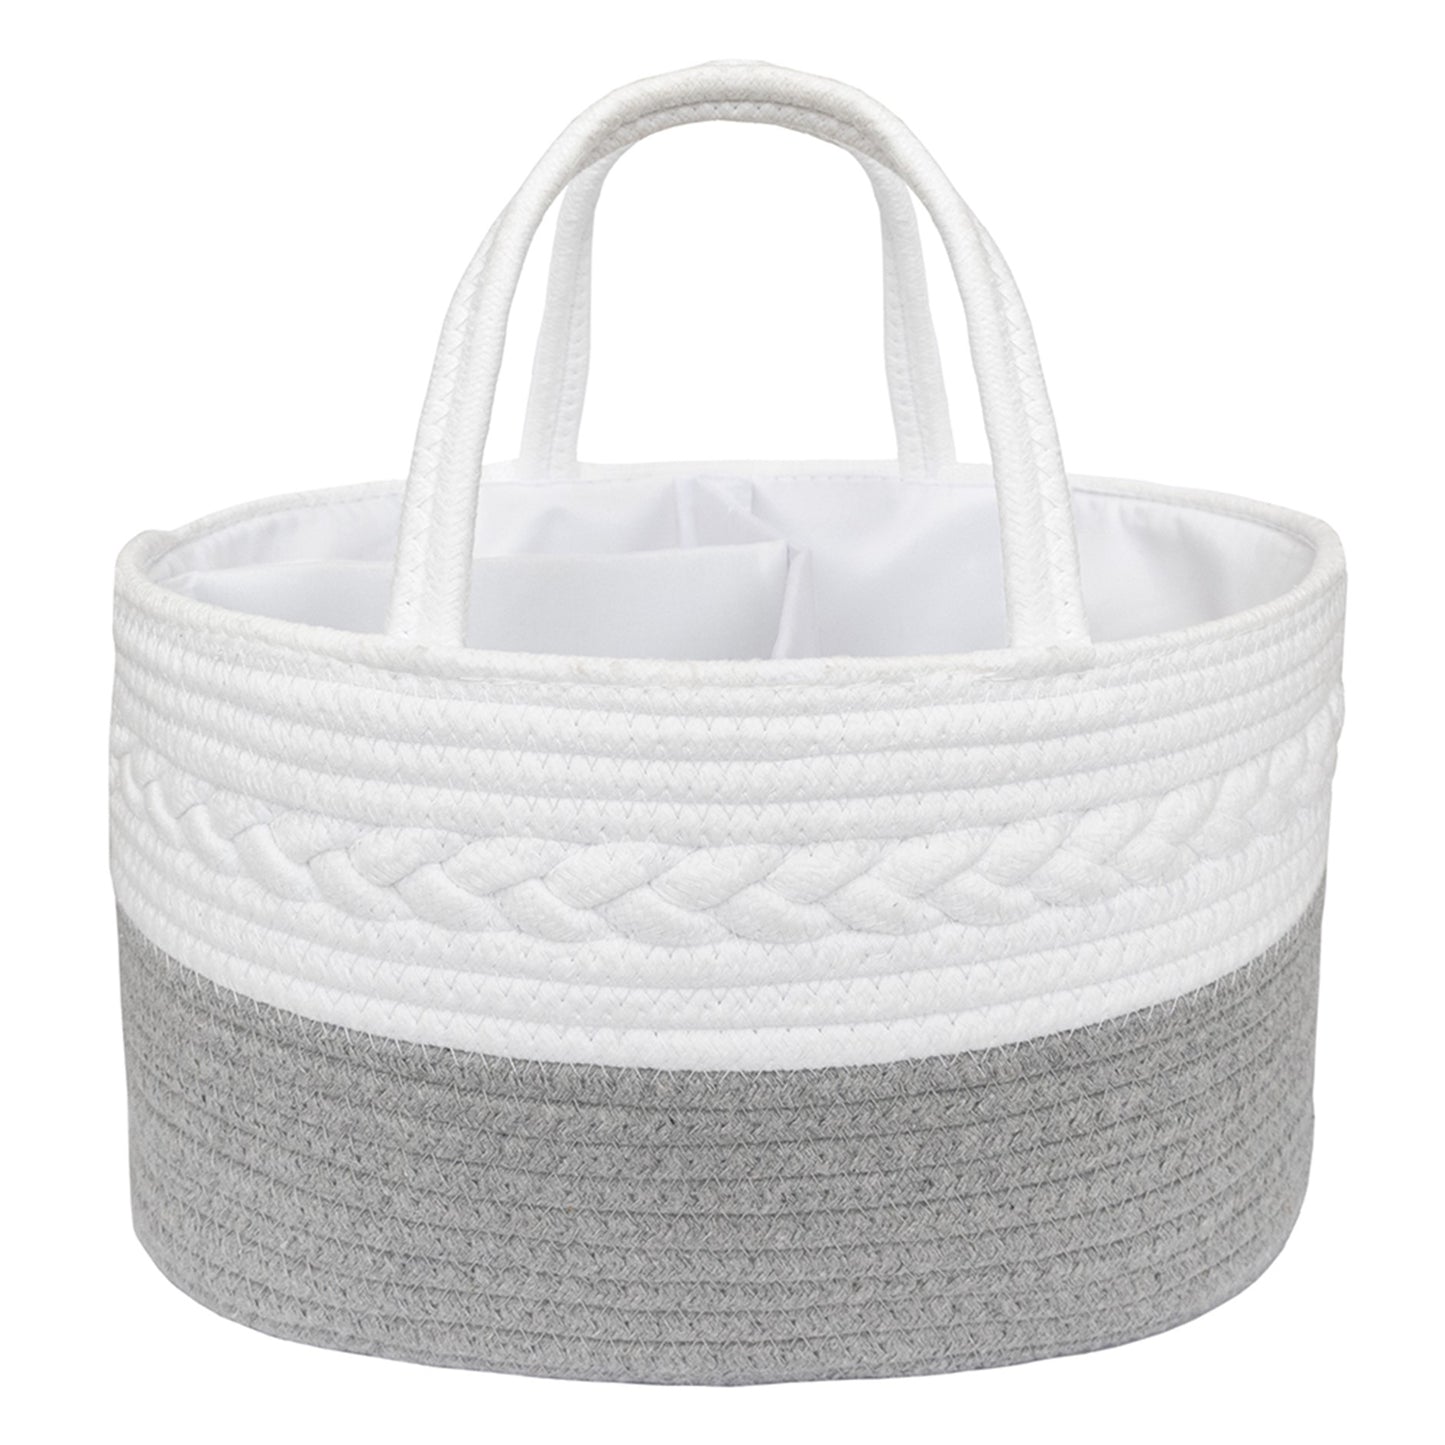 Living Textiles Cotton Rope Nappy Caddy - Grey/White